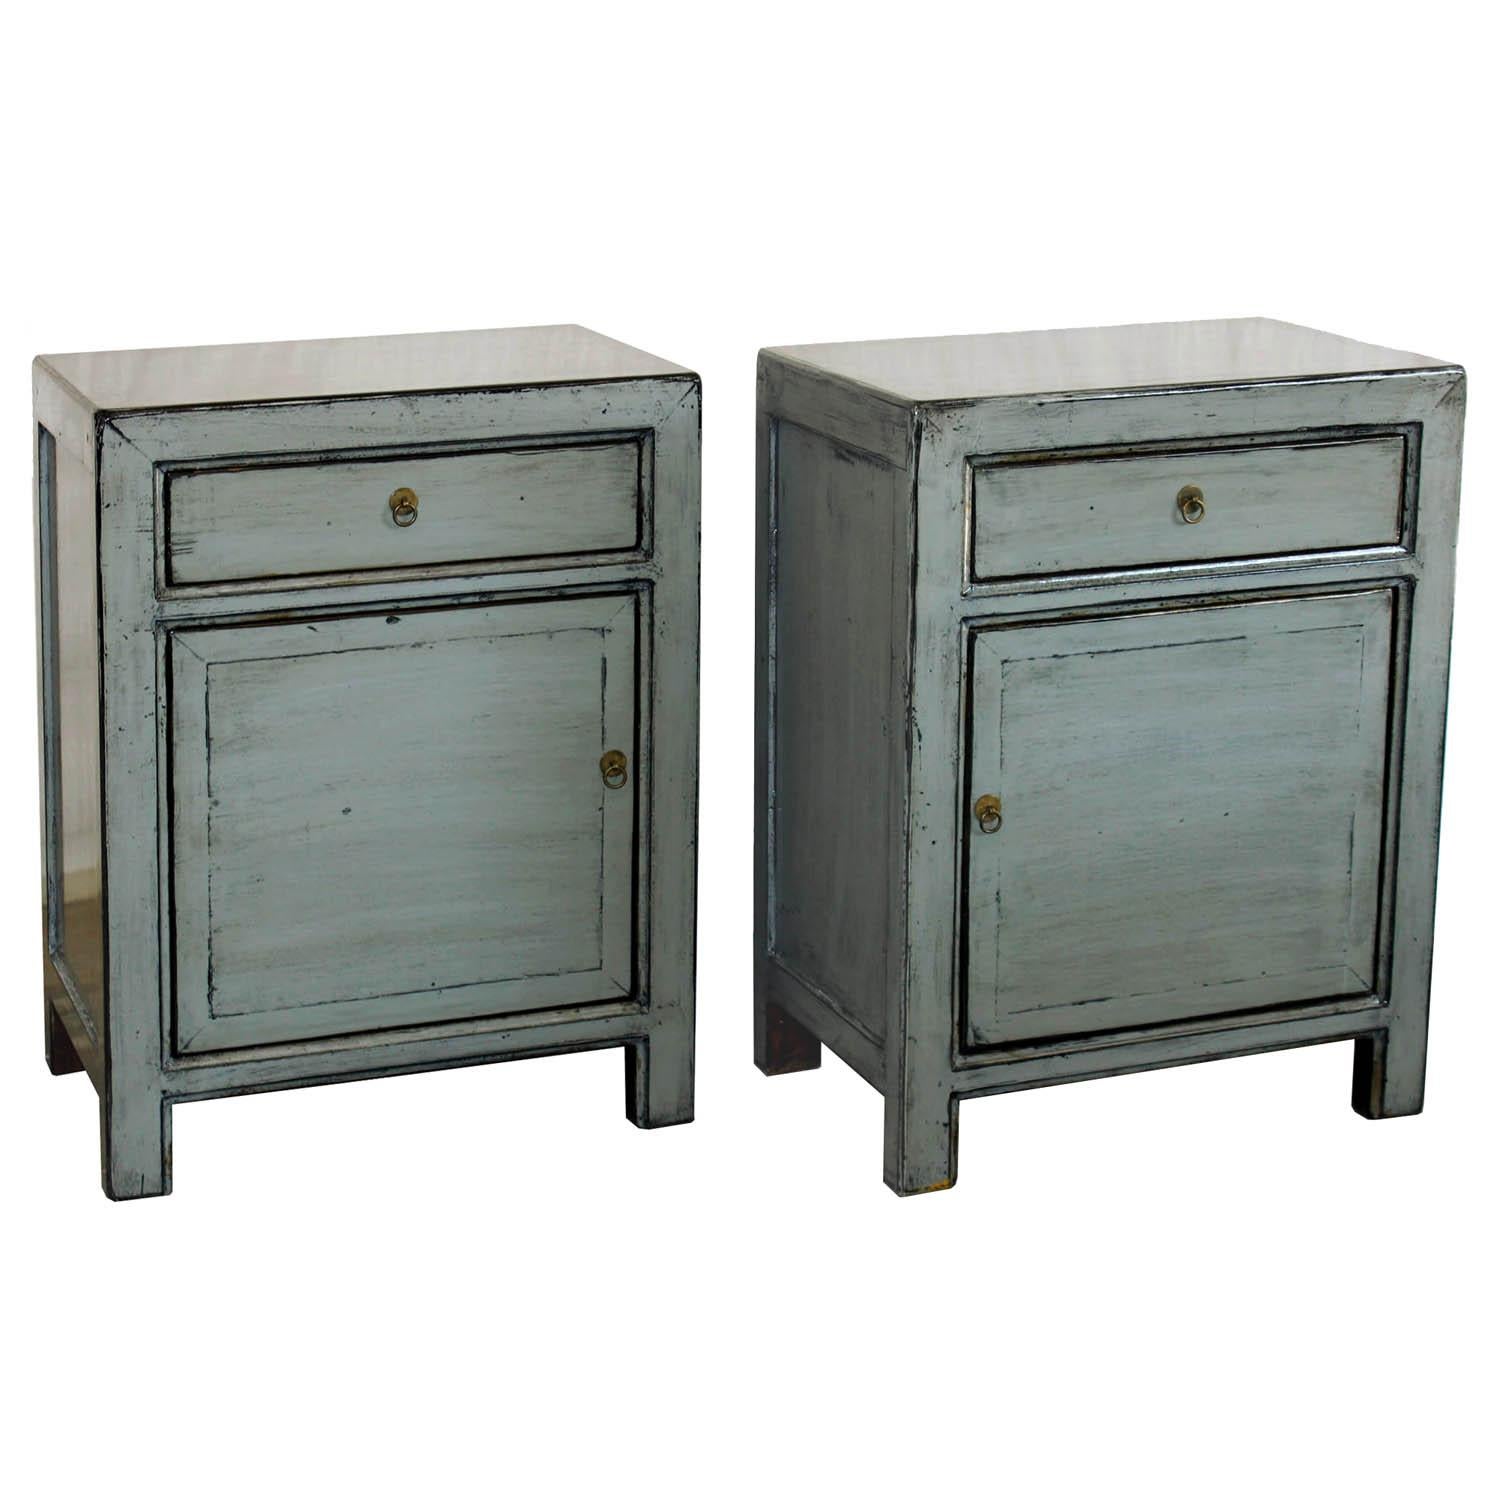 Contemporary one drawer gray lacquer side chest with hand rubbed edges can be used as a bedside chest with a lamp and accessories on top.